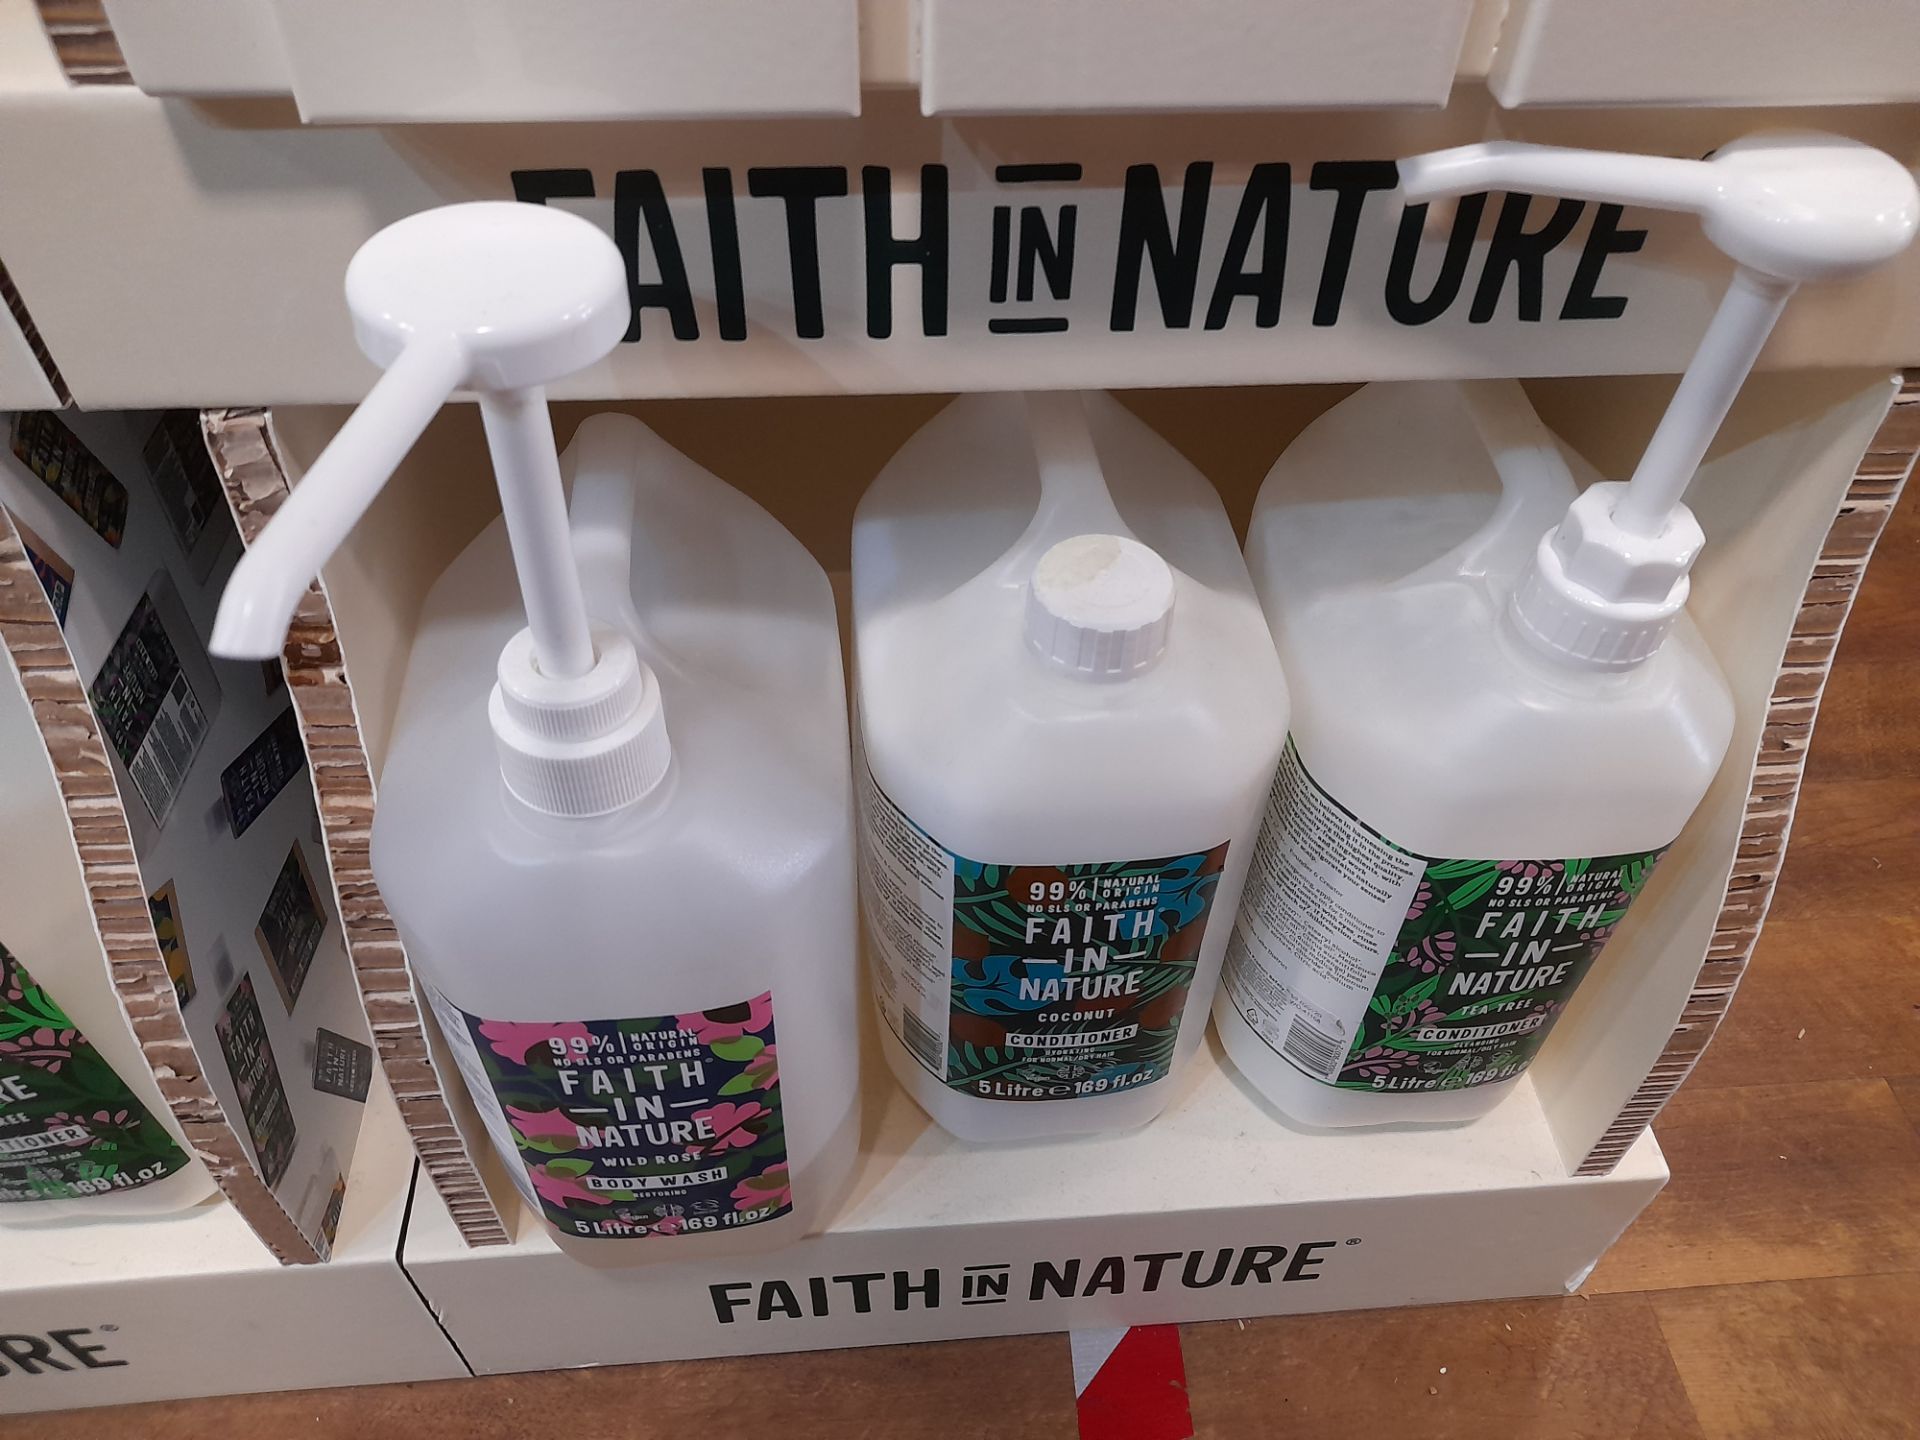 2x Faith in Nature Display Stands with 19x part opened Faith in Nature shampoos, conditioners, - Image 6 of 7